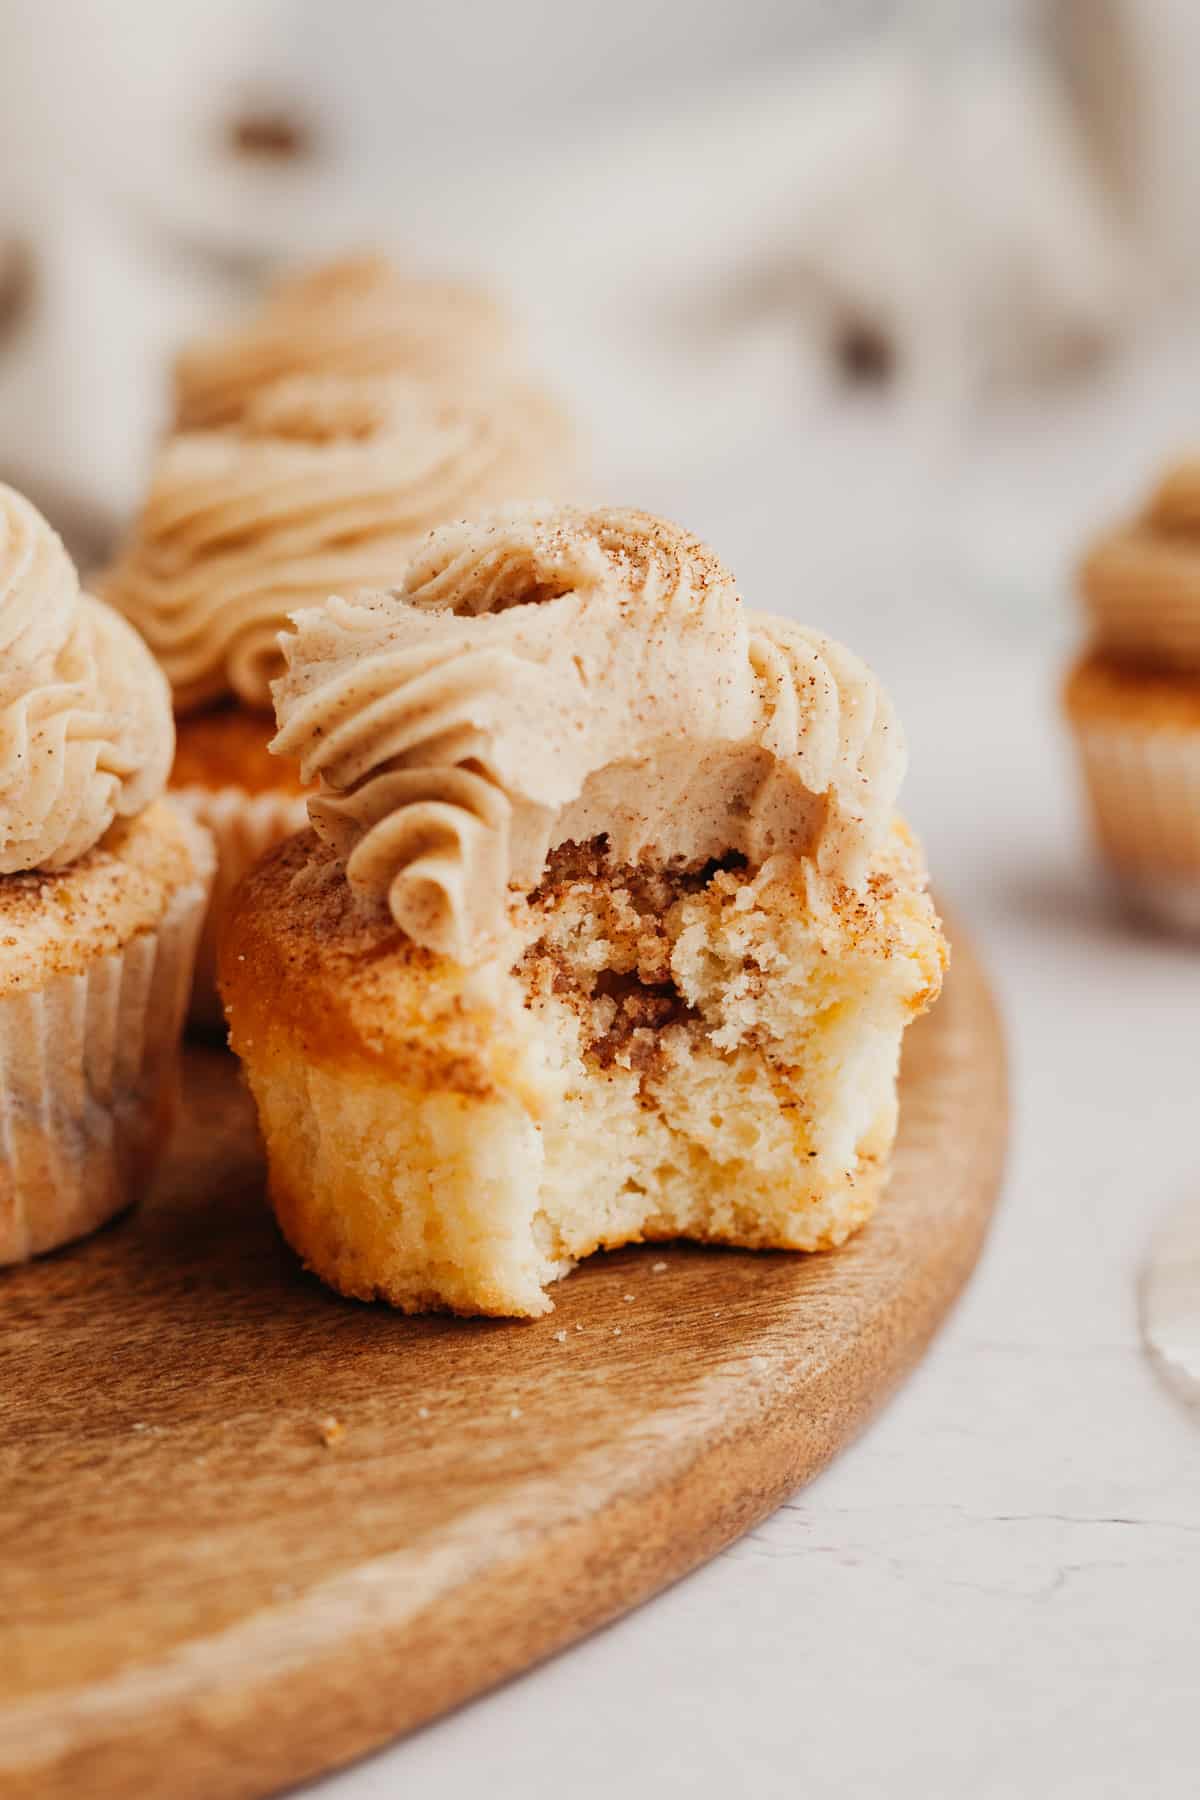 A cinnamon swirl cupcake with a bite taken out of it.